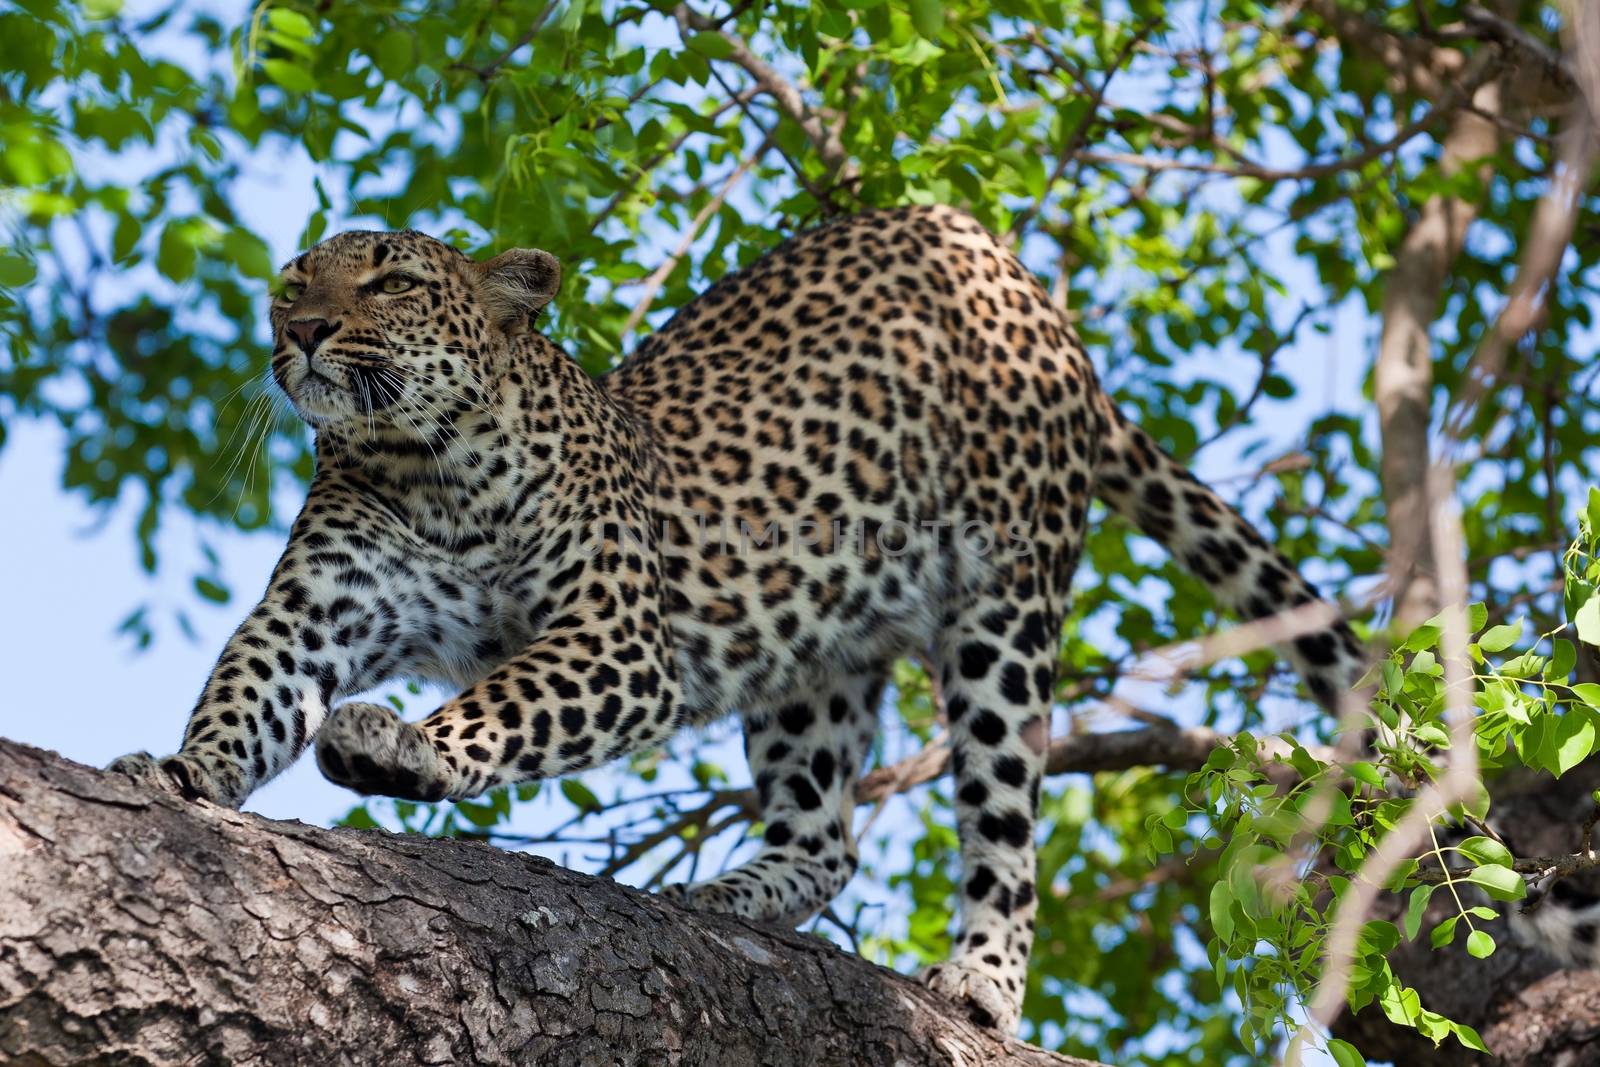 leopard in National Park in Tanzania by moizhusein